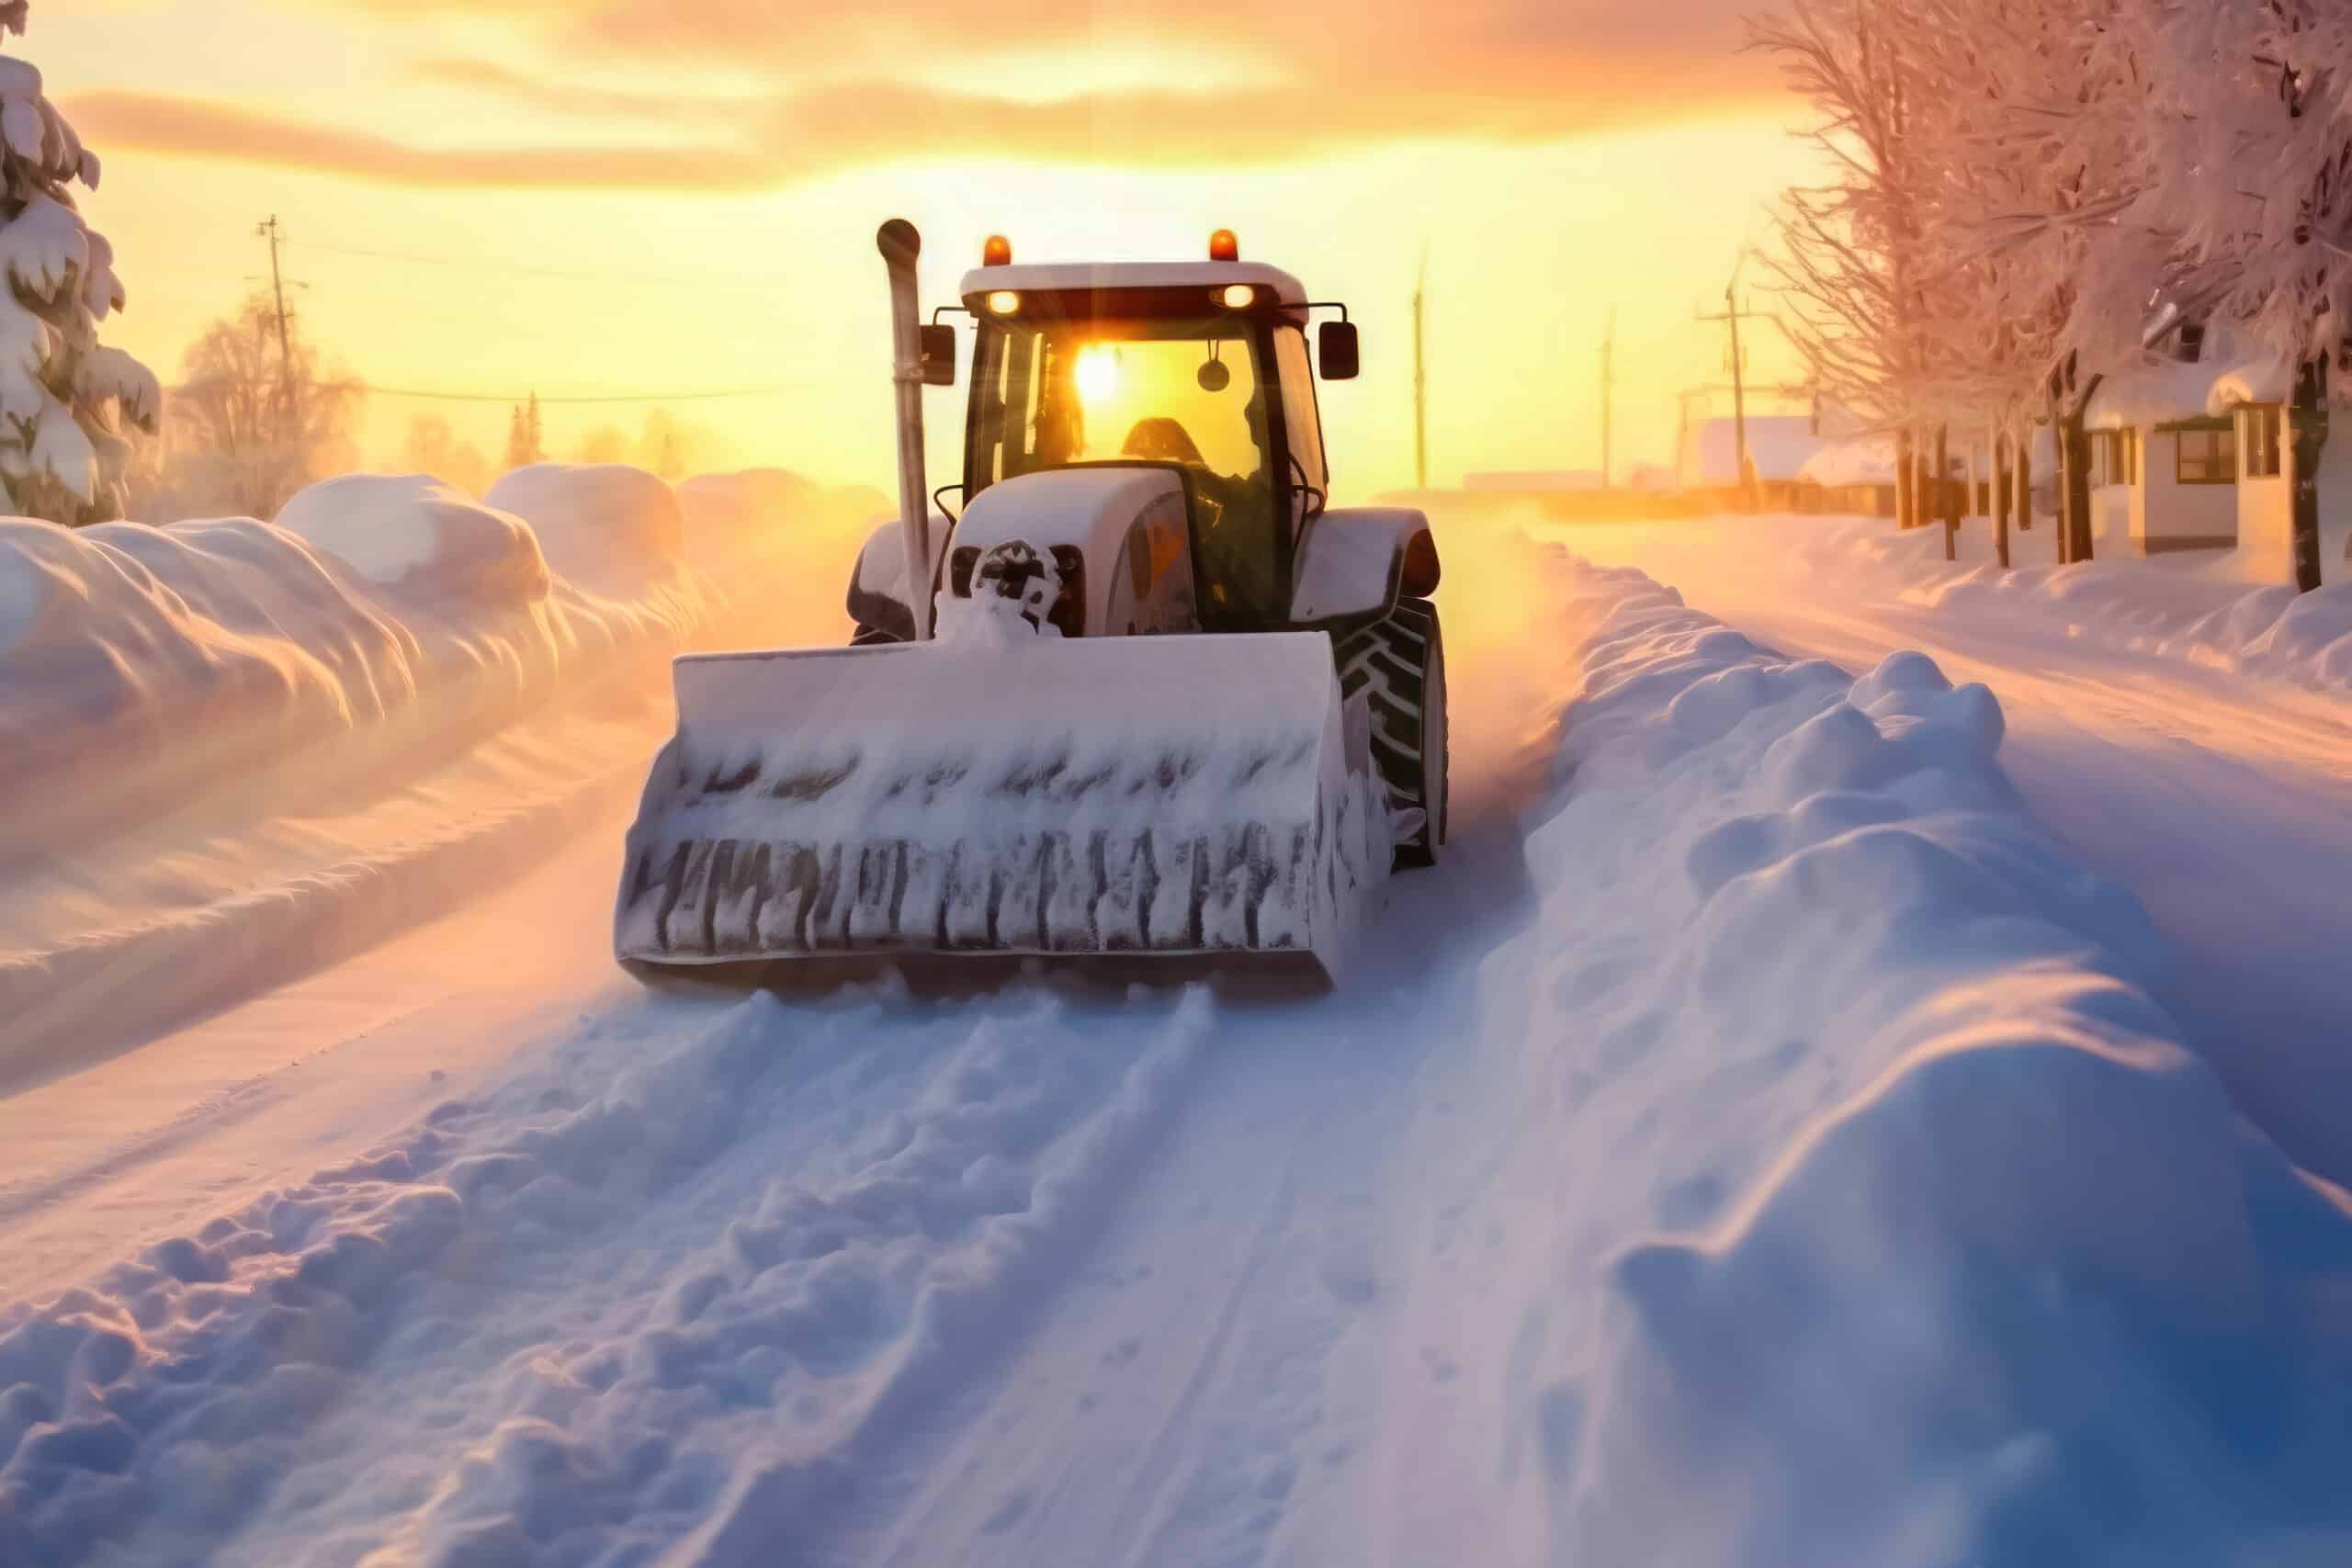 www.appr.com : How much can you expect to pay for a snow blower?